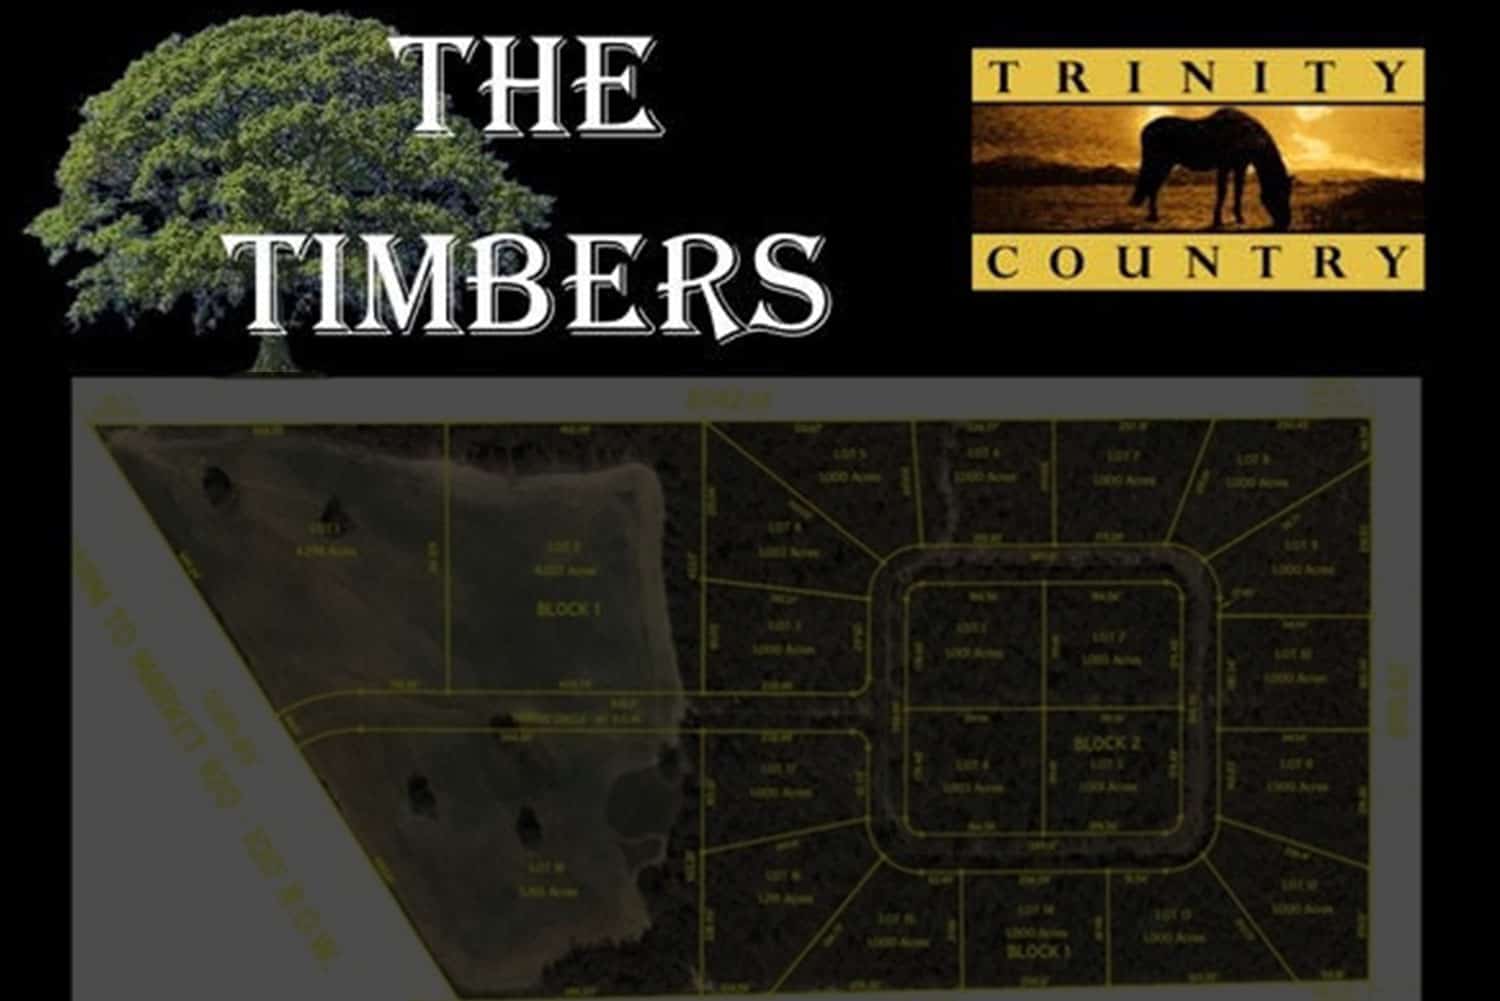 THE TIMBERS